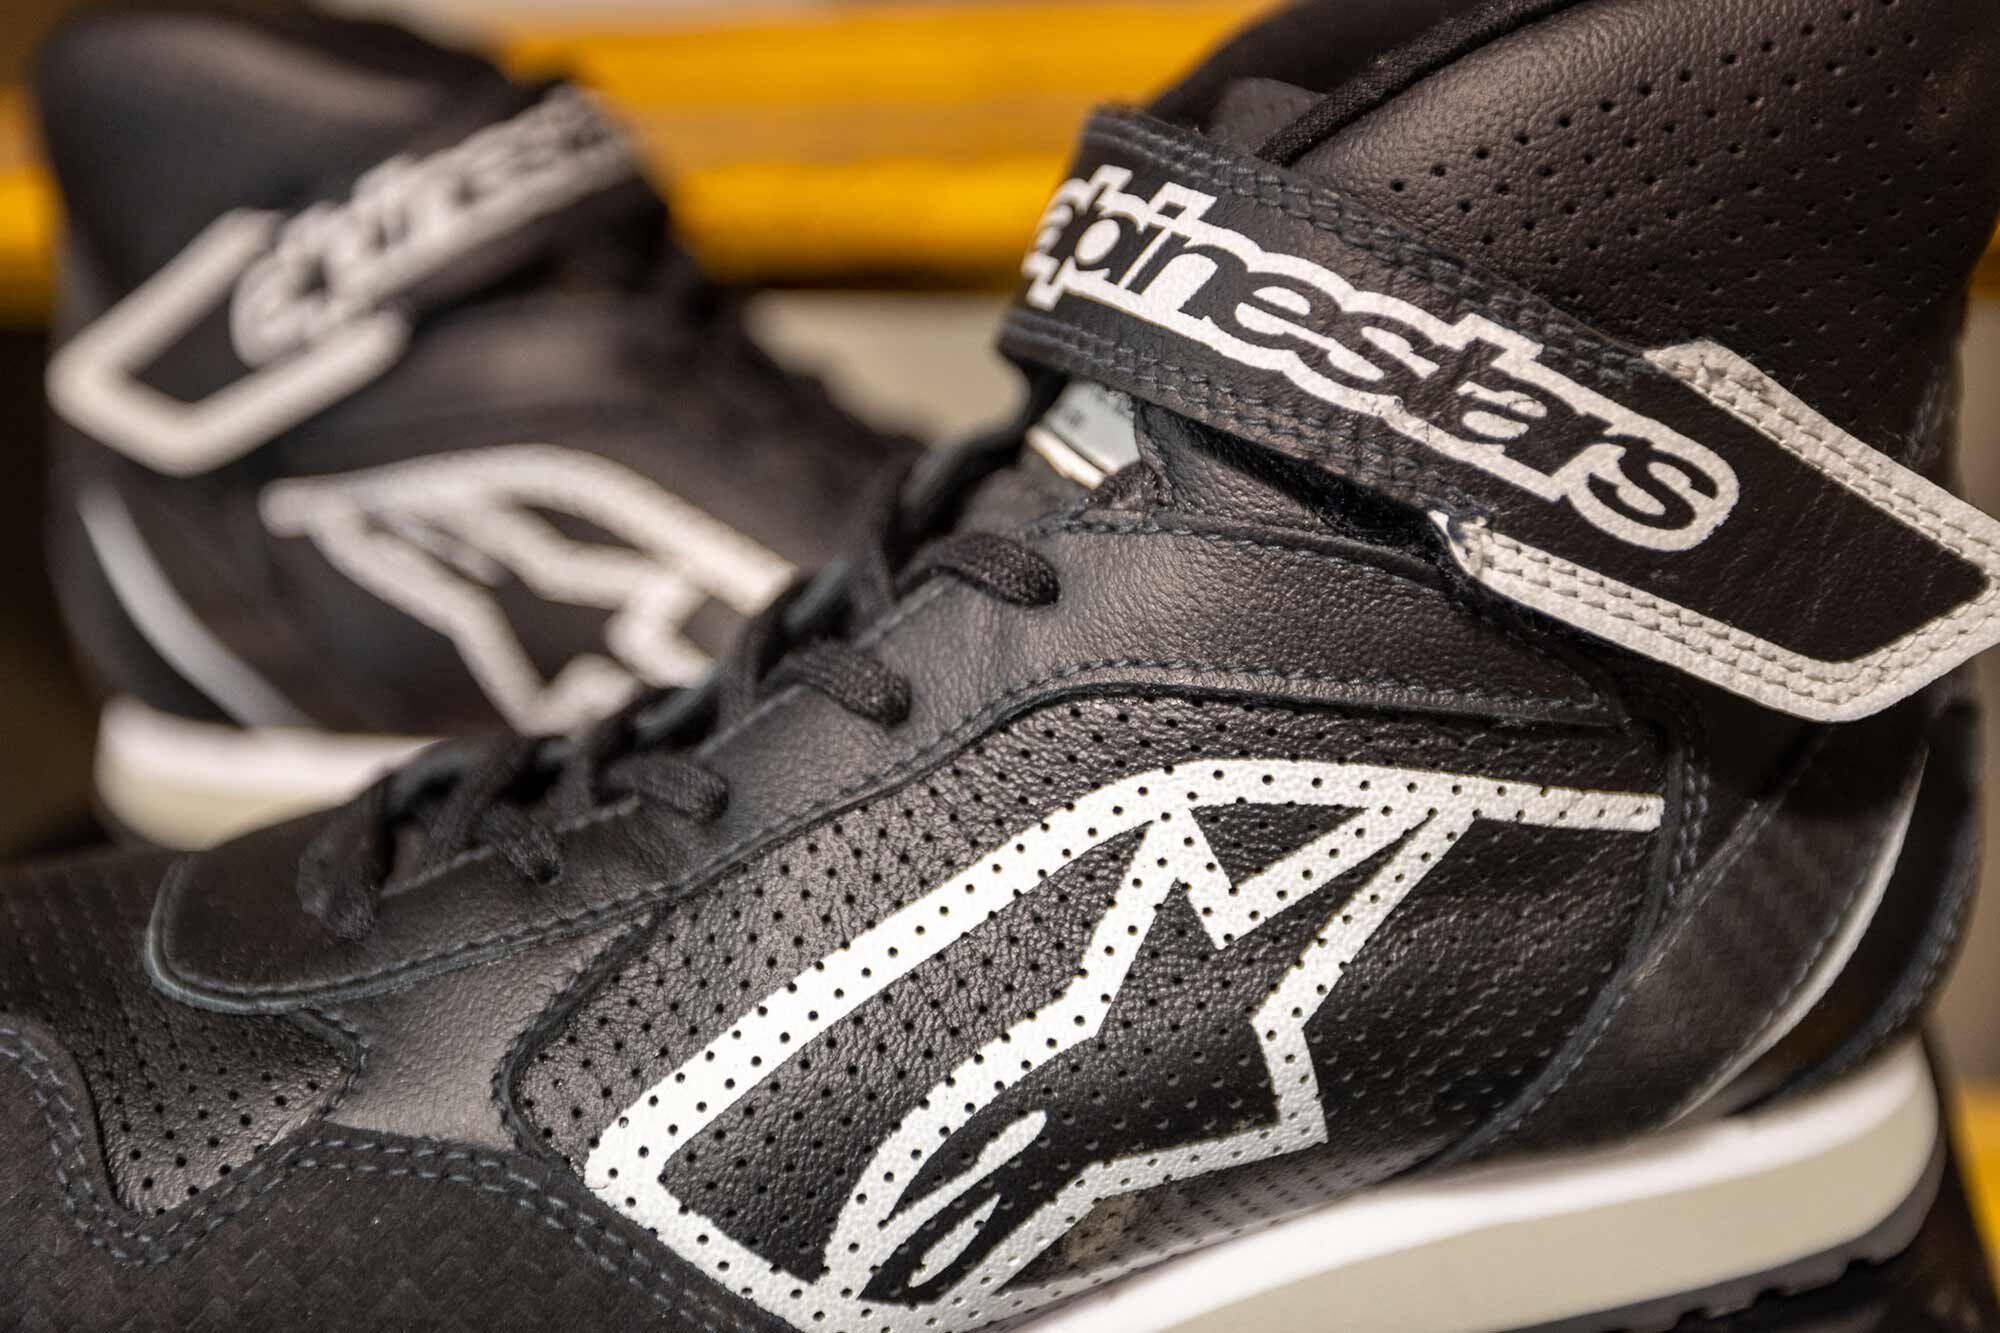 Conventional laces and a Velcro strap ensure your shoes won't fall short while slamming pedals.